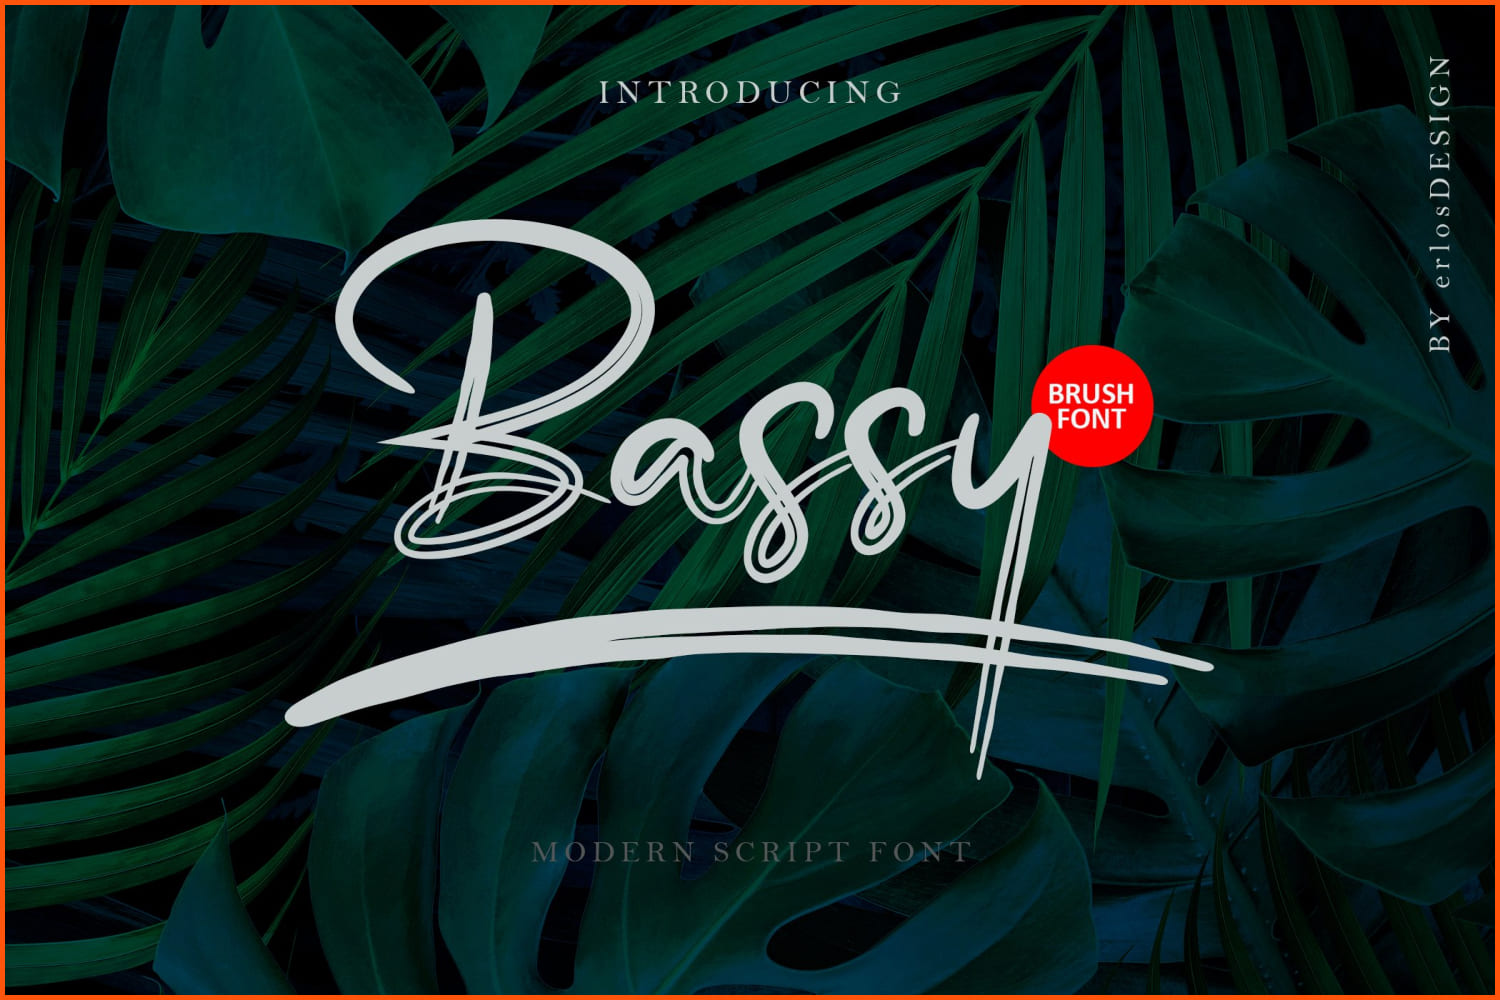 White text Bassy on green leaves background.